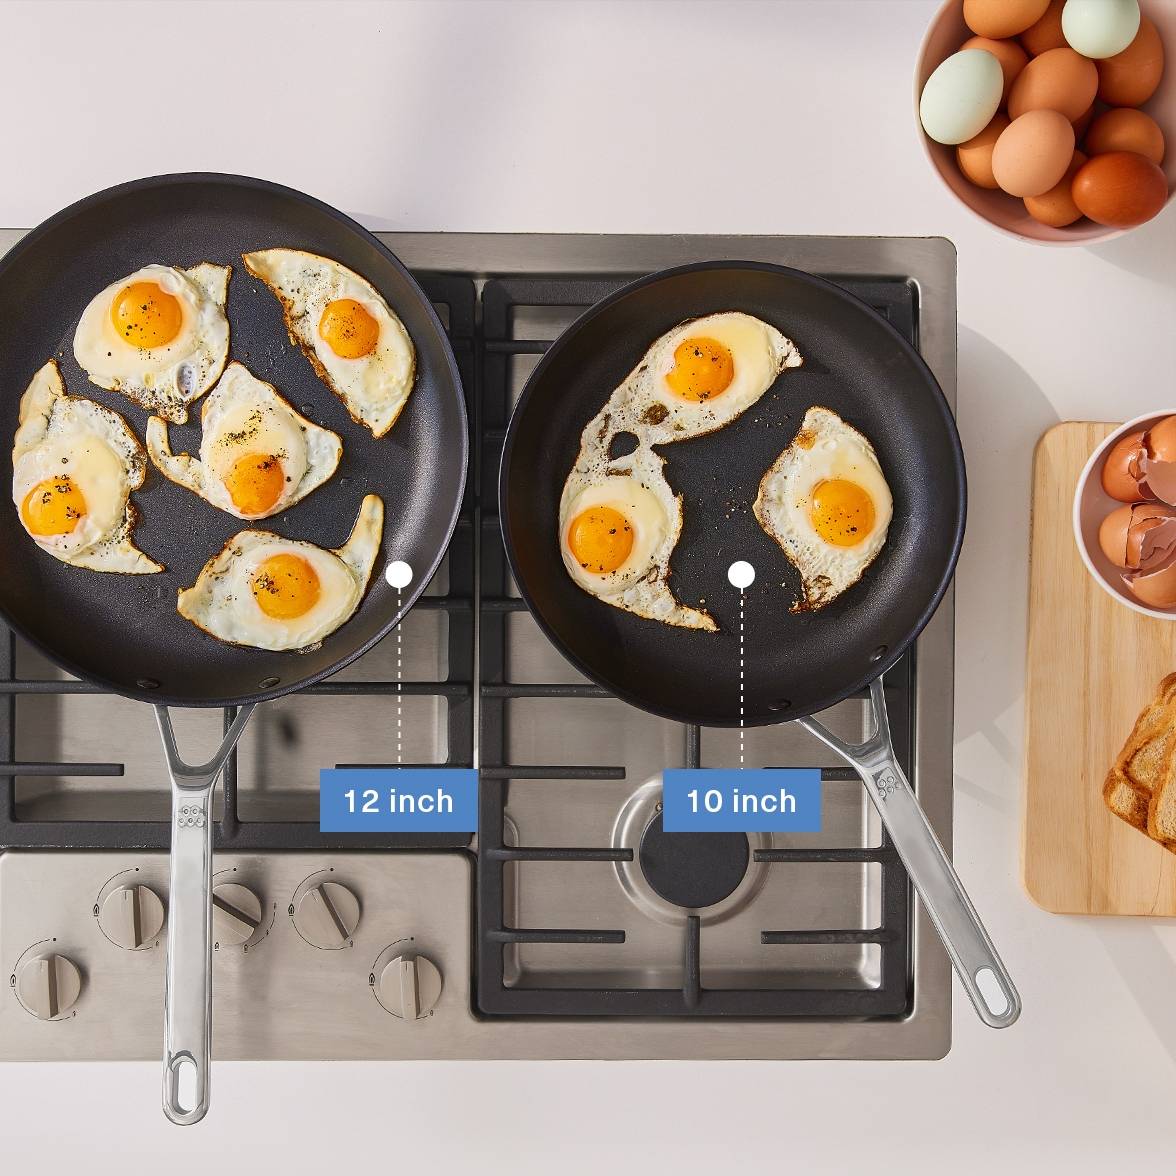 A bird’s eye view of the Misen 12-inch and 10-inch Nonstick Pans on a stovetop with fried eggs inside. To the right is a Misen Wood Cutting Board with toast and empty eggshells on it. A caption shows the 12-inch pan on the left, and the 10-inch pan on the right.